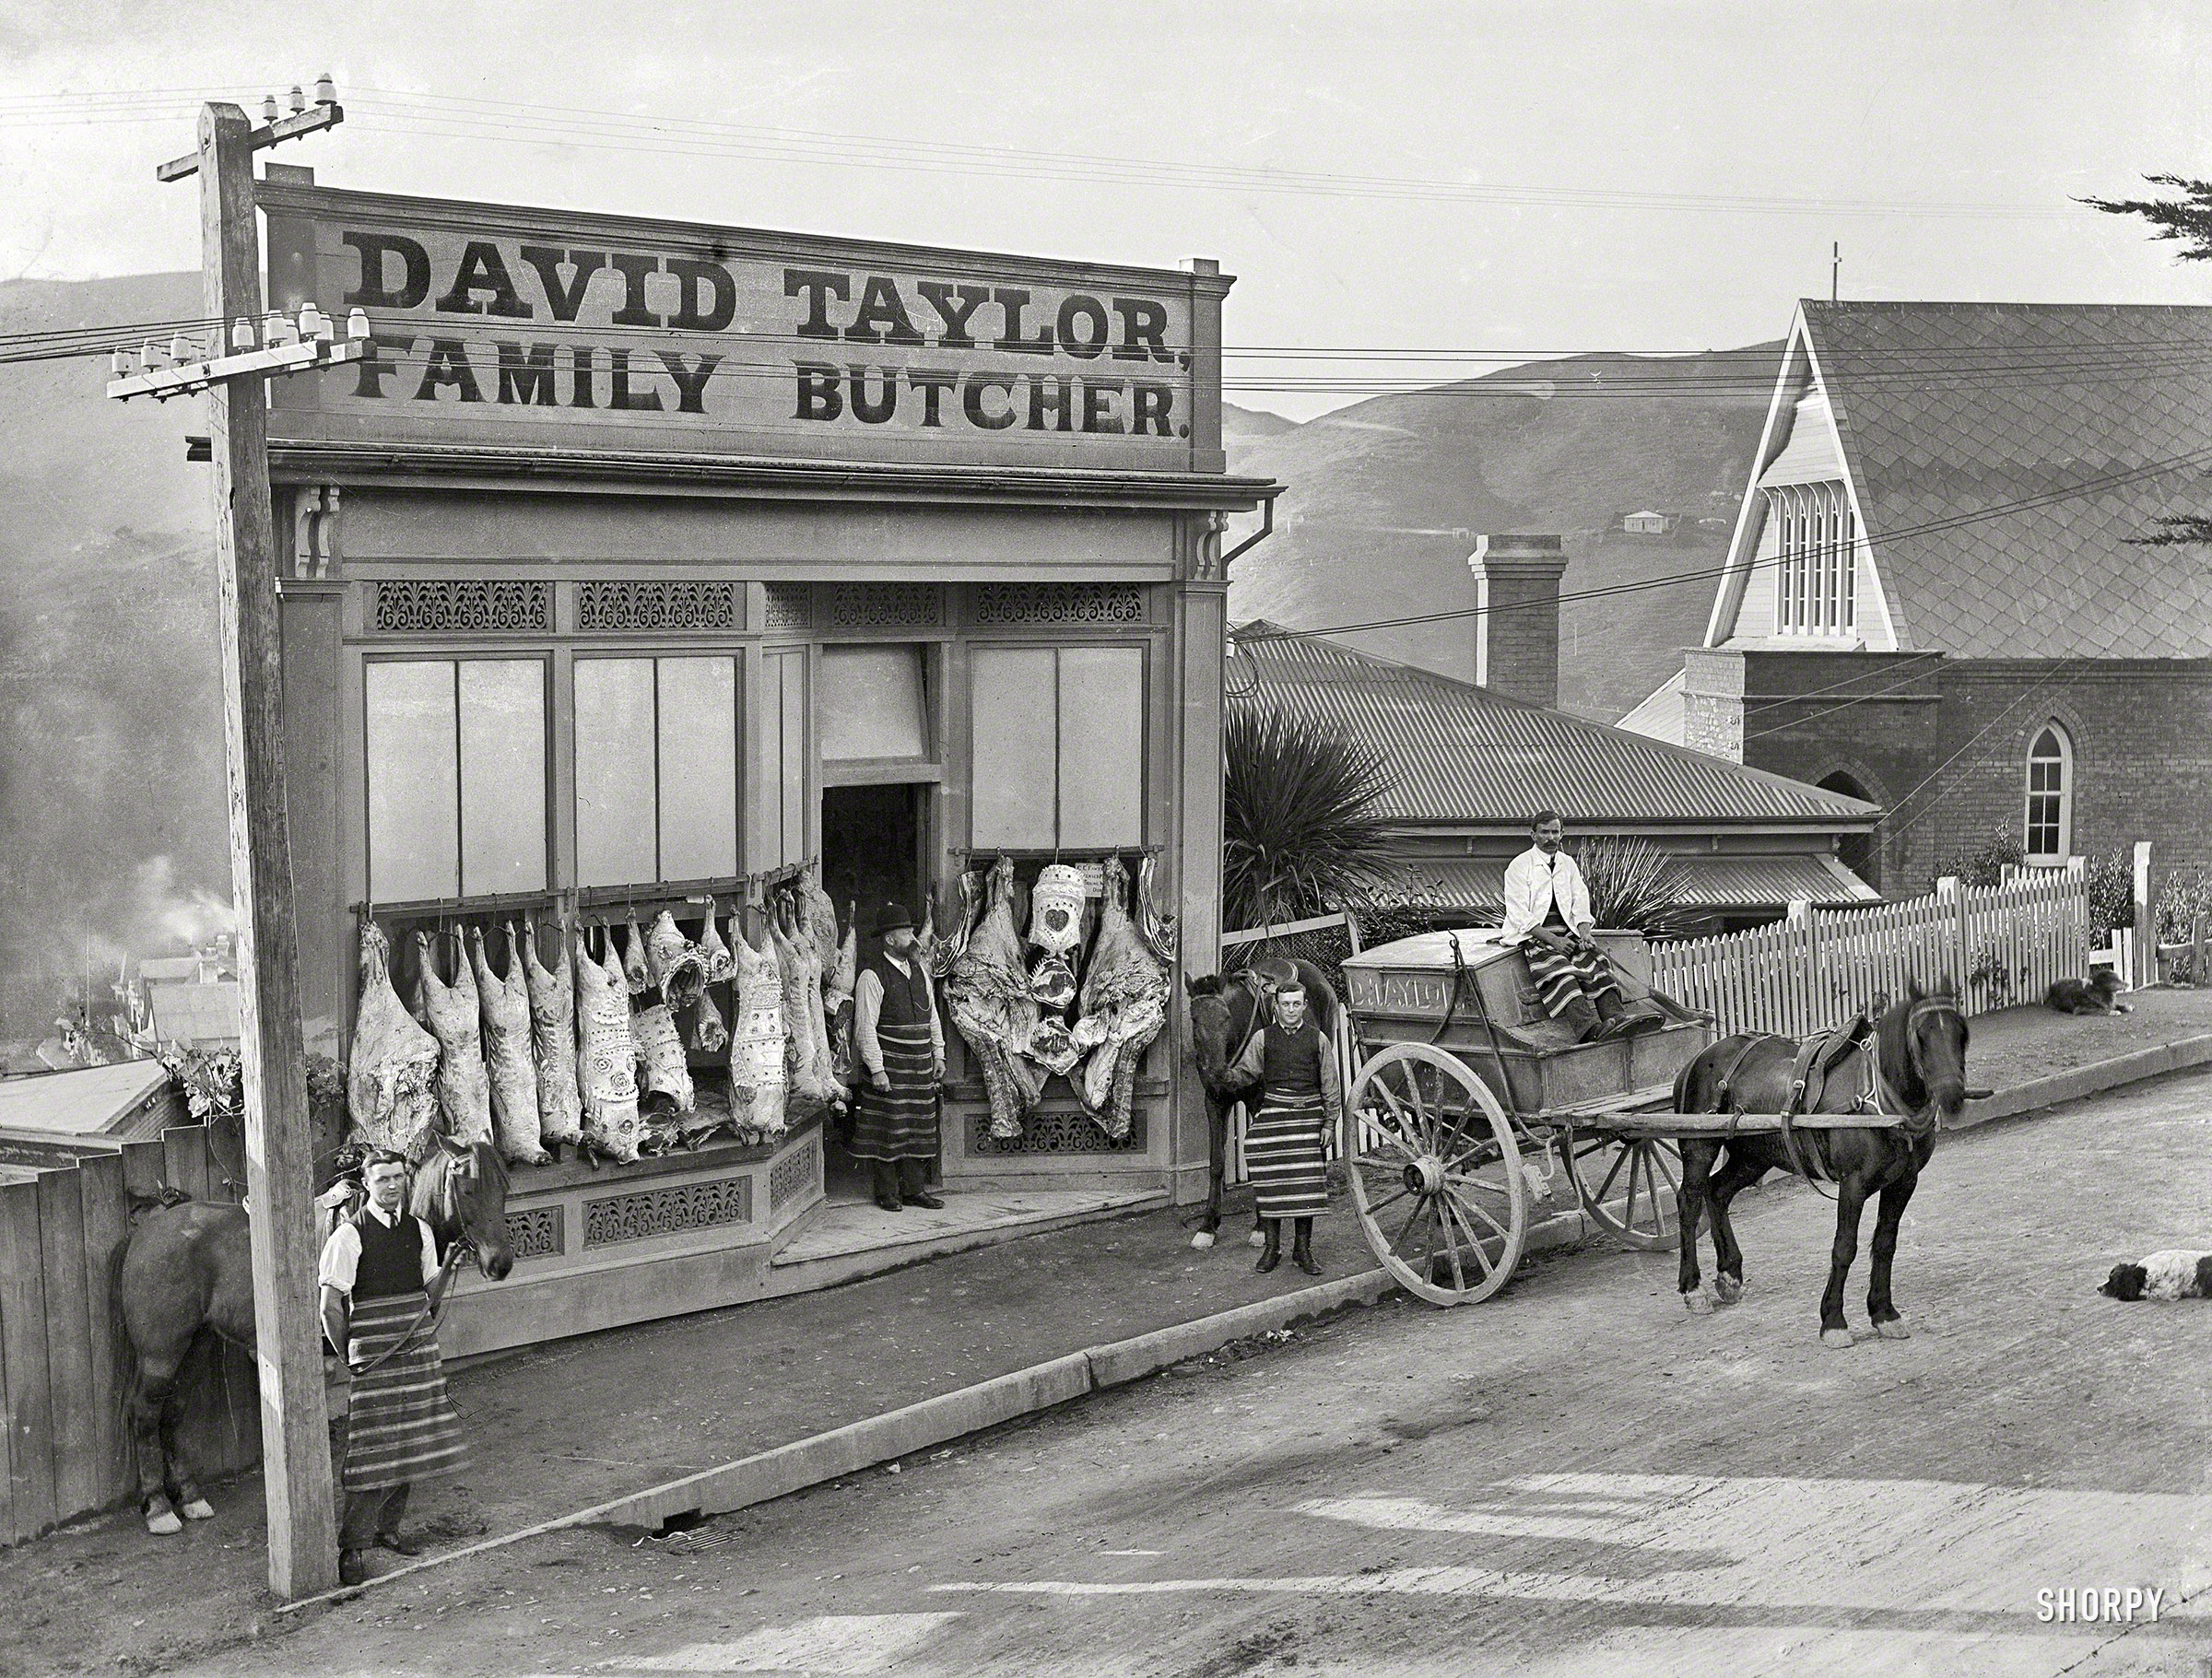 1910. Wellington, New Zealand. "David Taylor's butcher shop, Wadestown, showing decorated carcasses and horse-drawn delivery cart. David Taylor in doorway." Glass plate negative by Frederick James Halse. View full size.